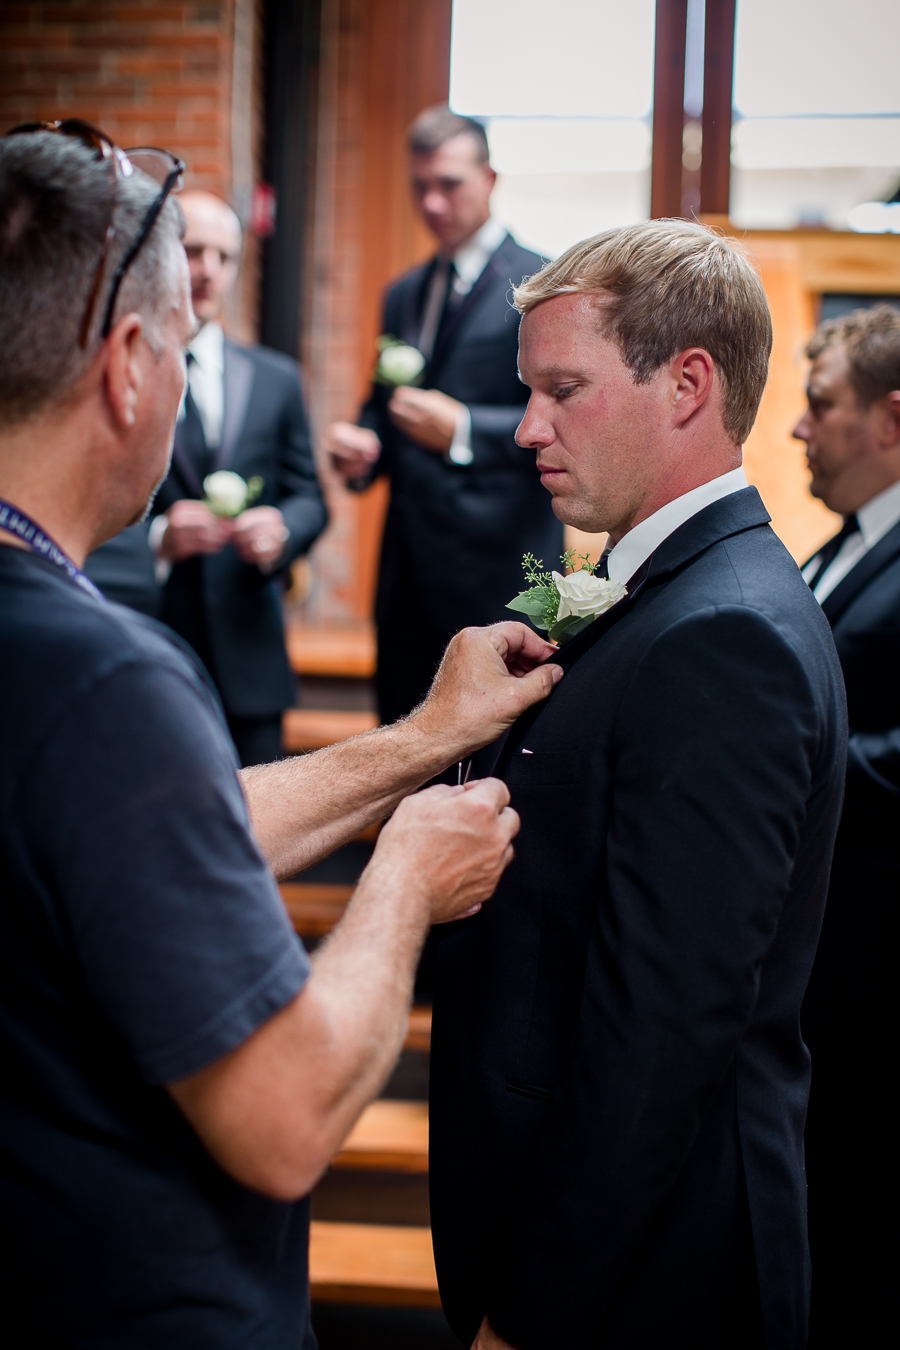 Groom getting flower put on at this wedding at The Standard by Knoxville Wedding Photographer, Amanda May Photos.